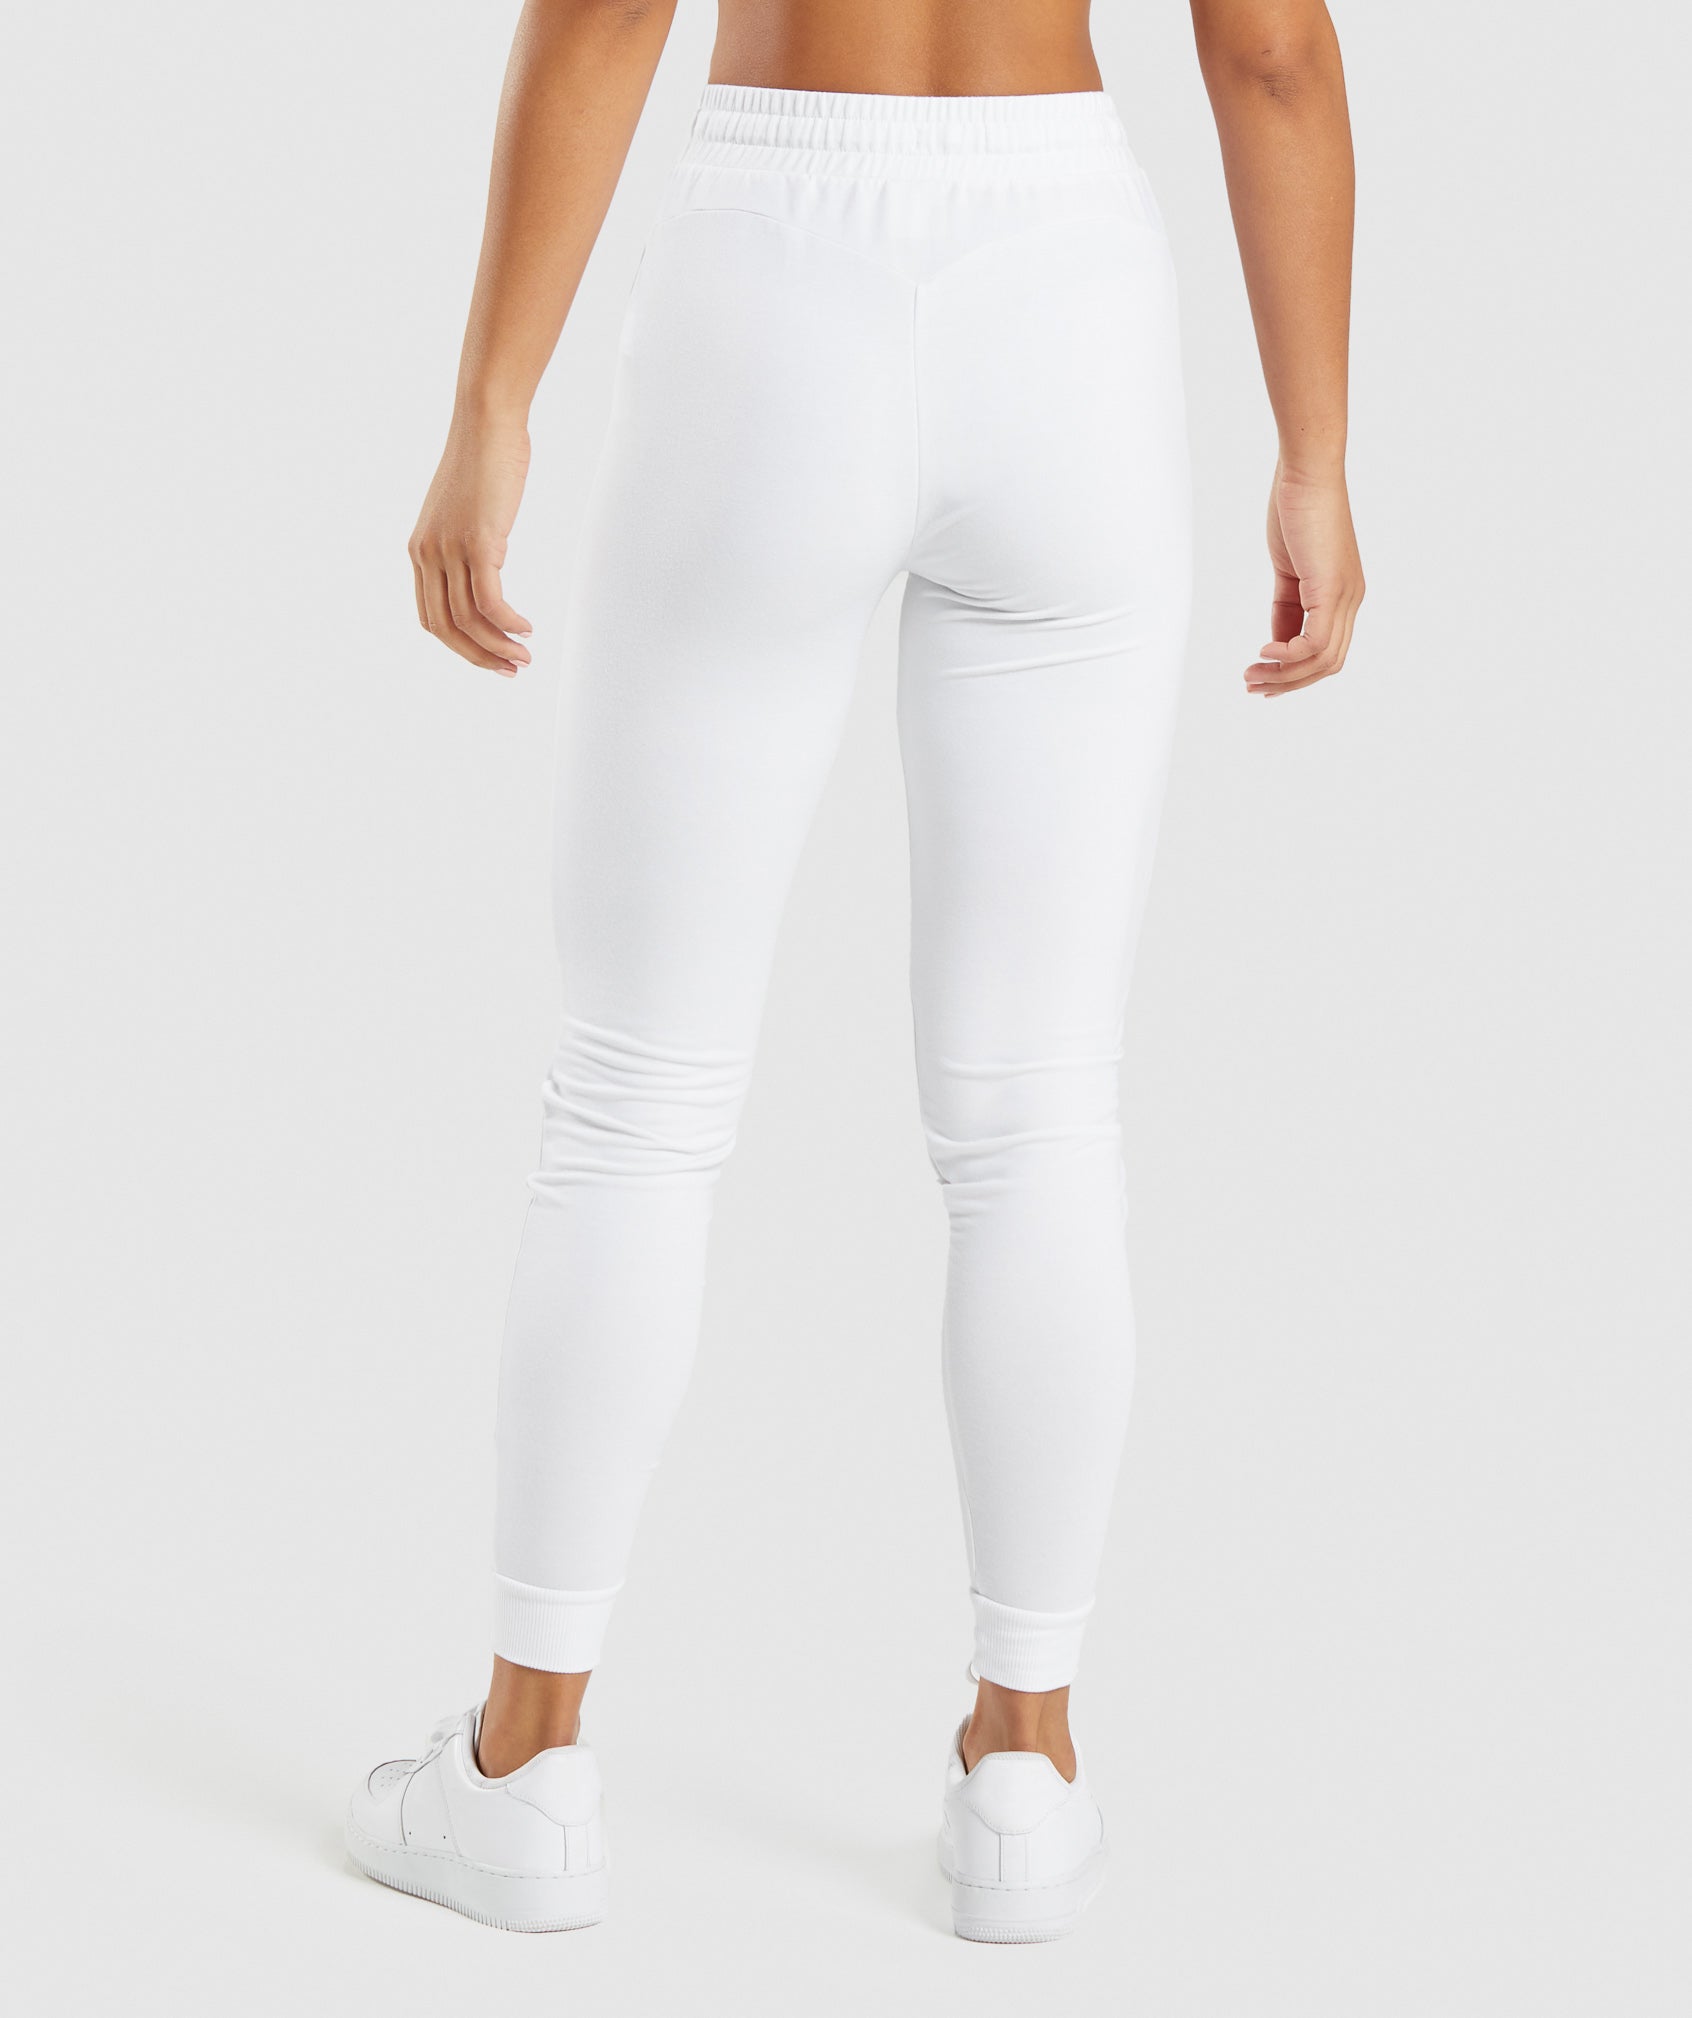 Training Pippa Joggers in White - view 3